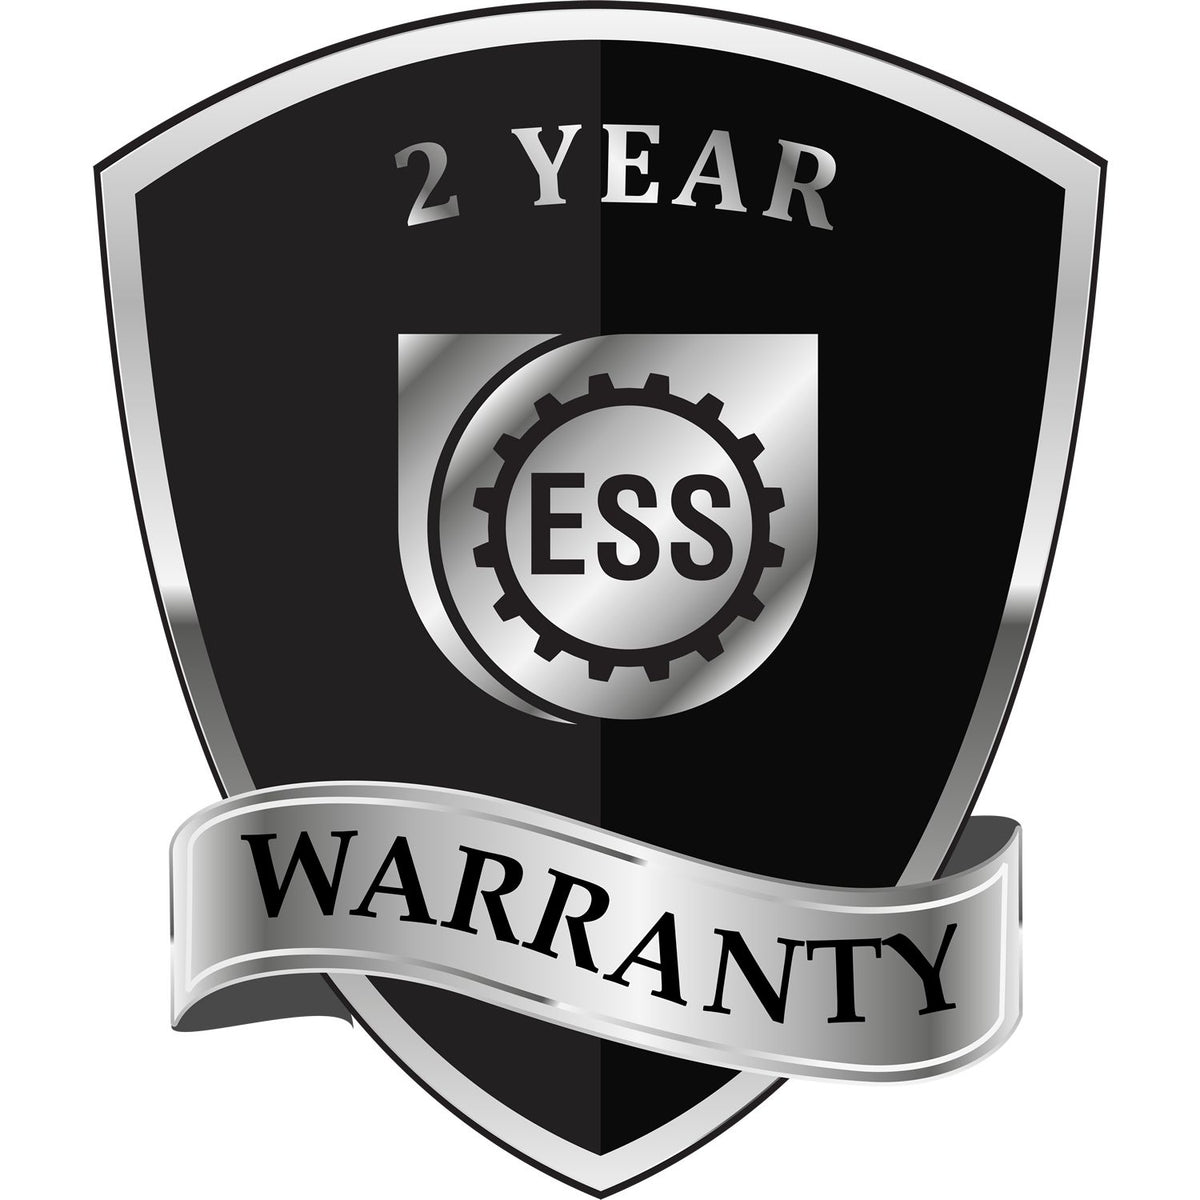 A black and silver badge or emblem showing warranty information for the Gift Connecticut Engineer Seal